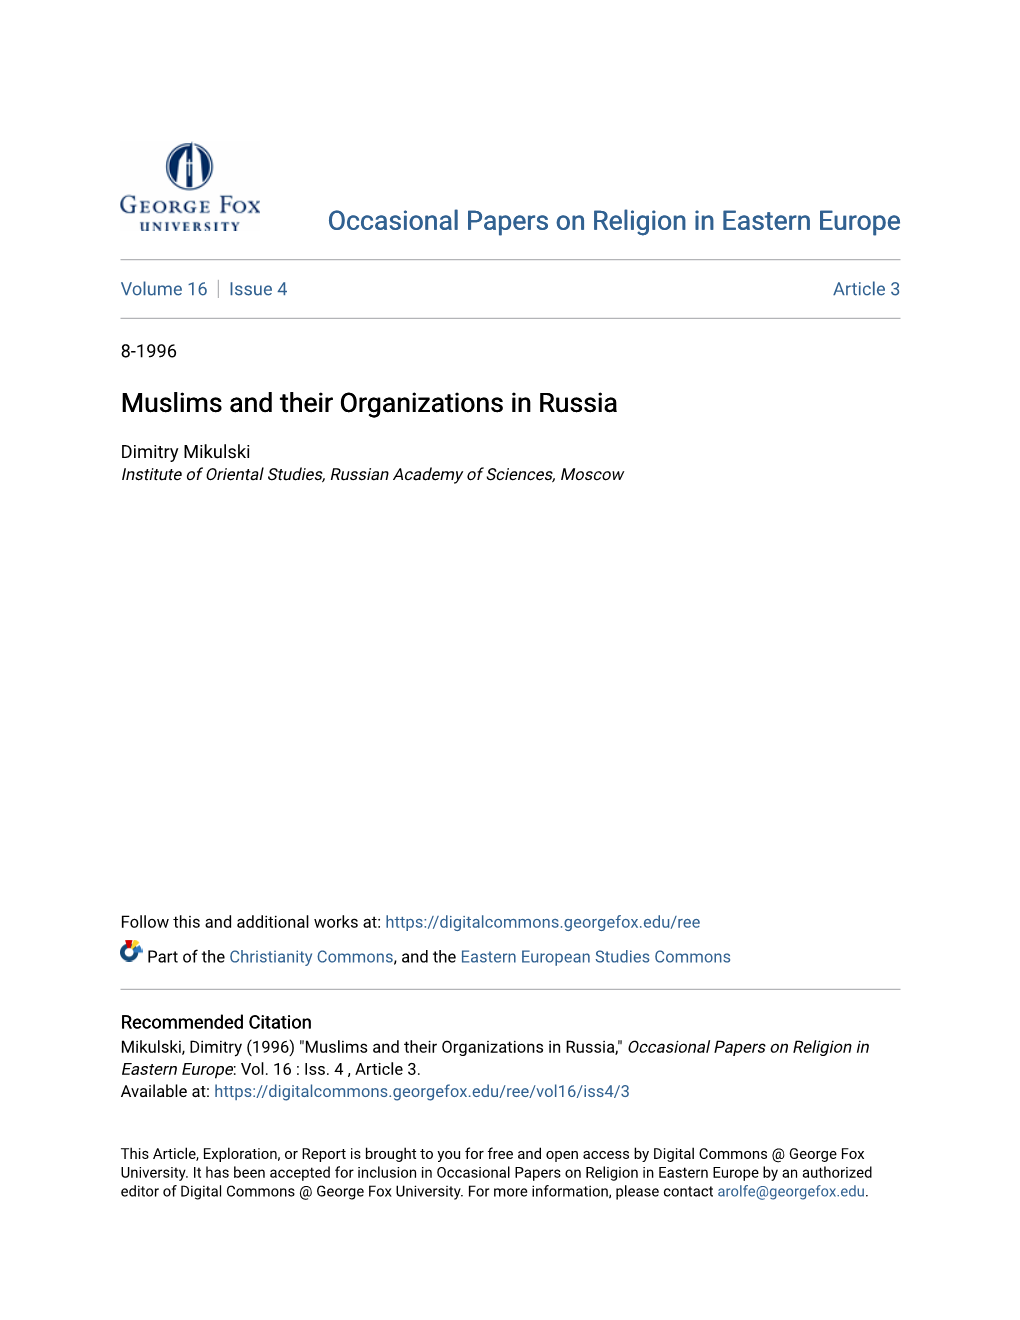 Muslims and Their Organizations in Russia